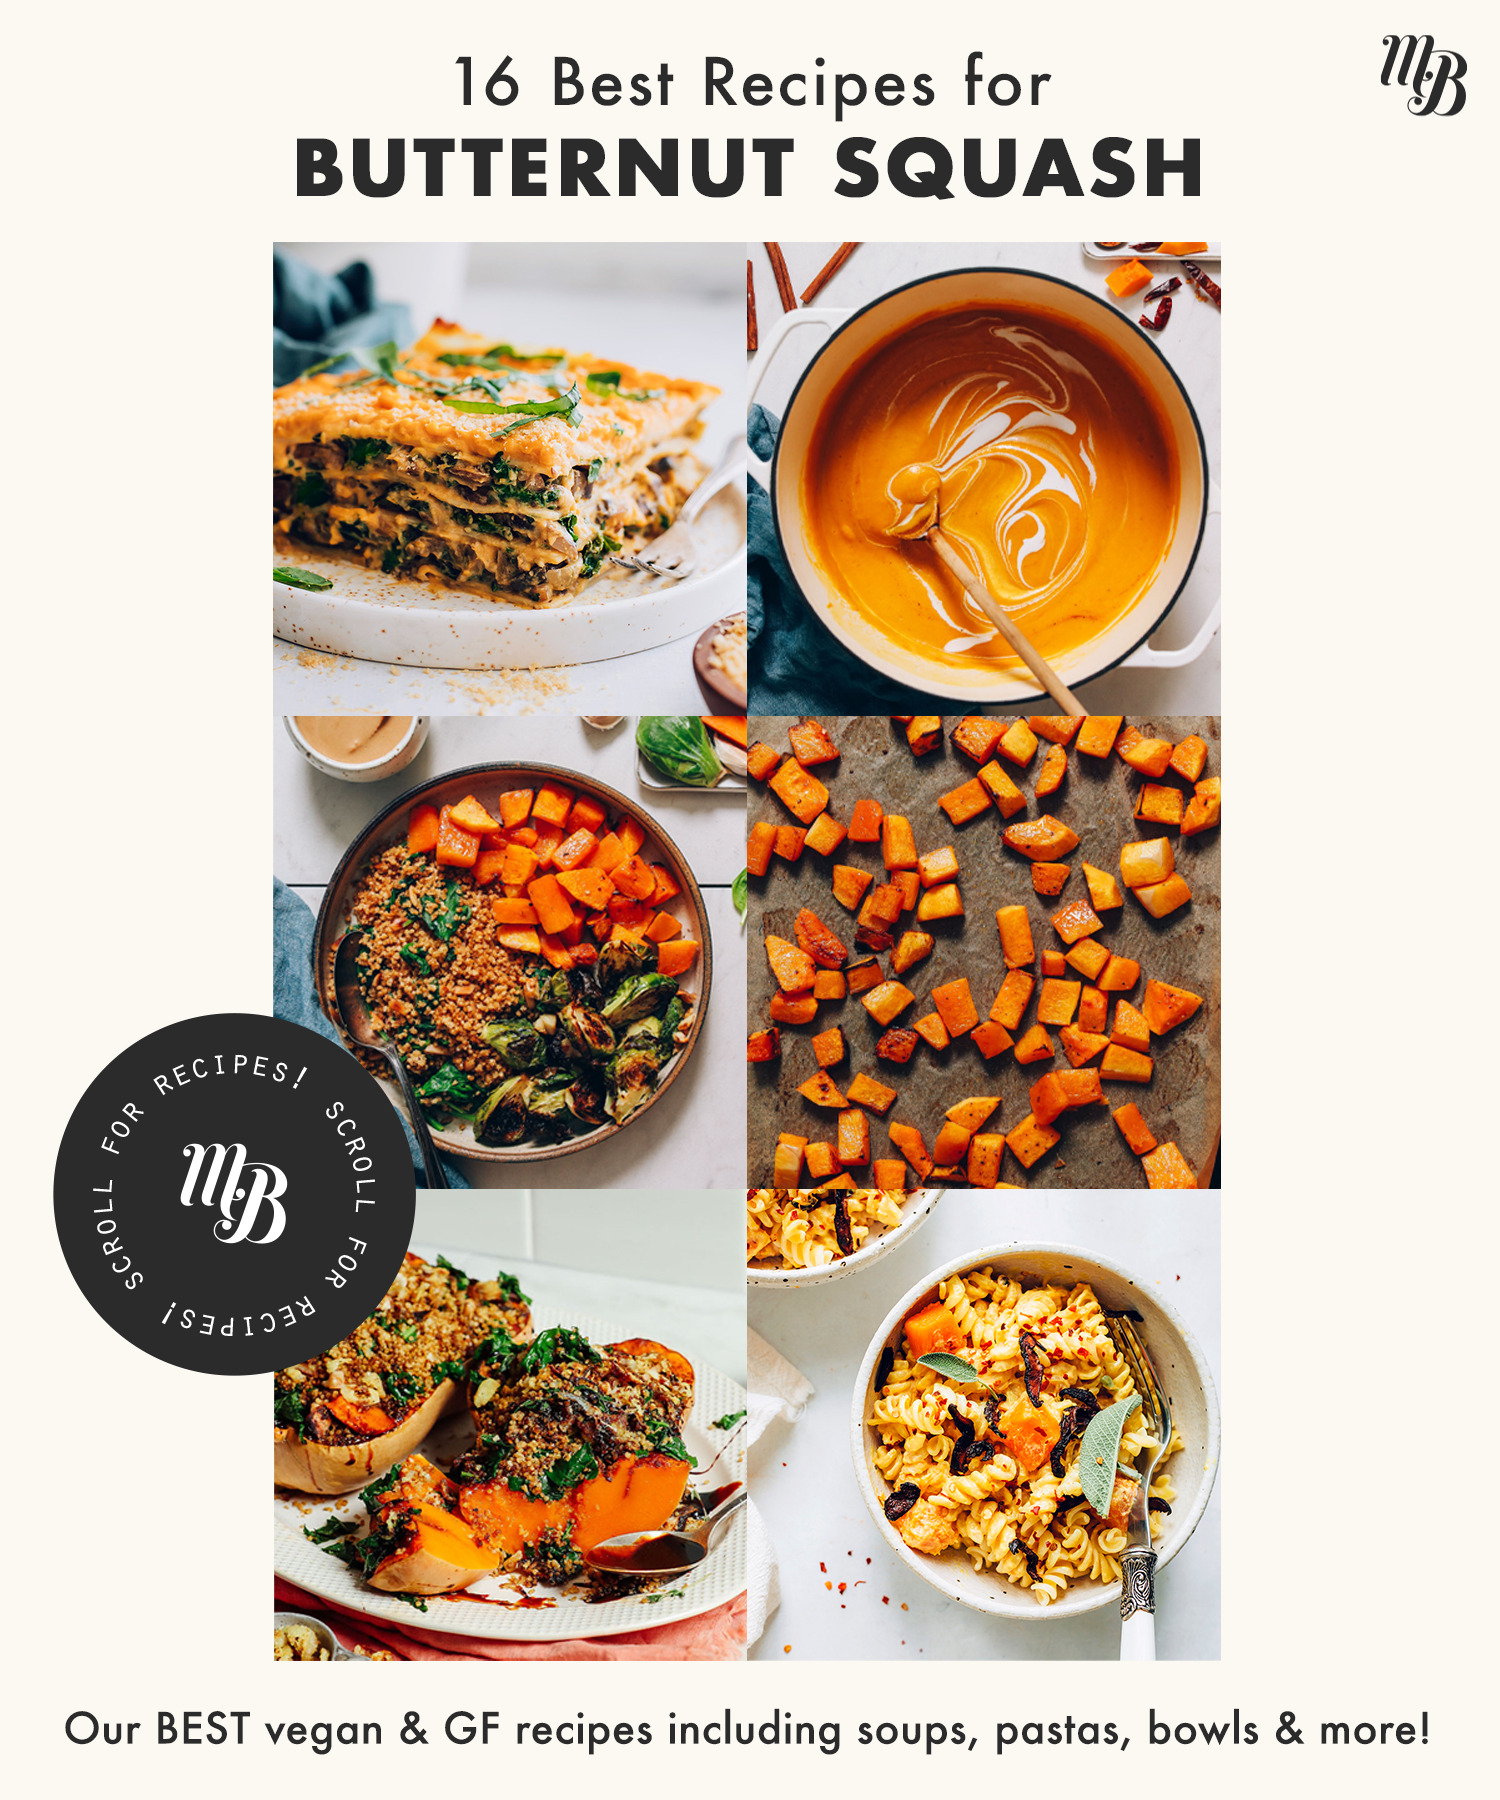 Soup, pasta, lasagna, and other recipes with butternut squash